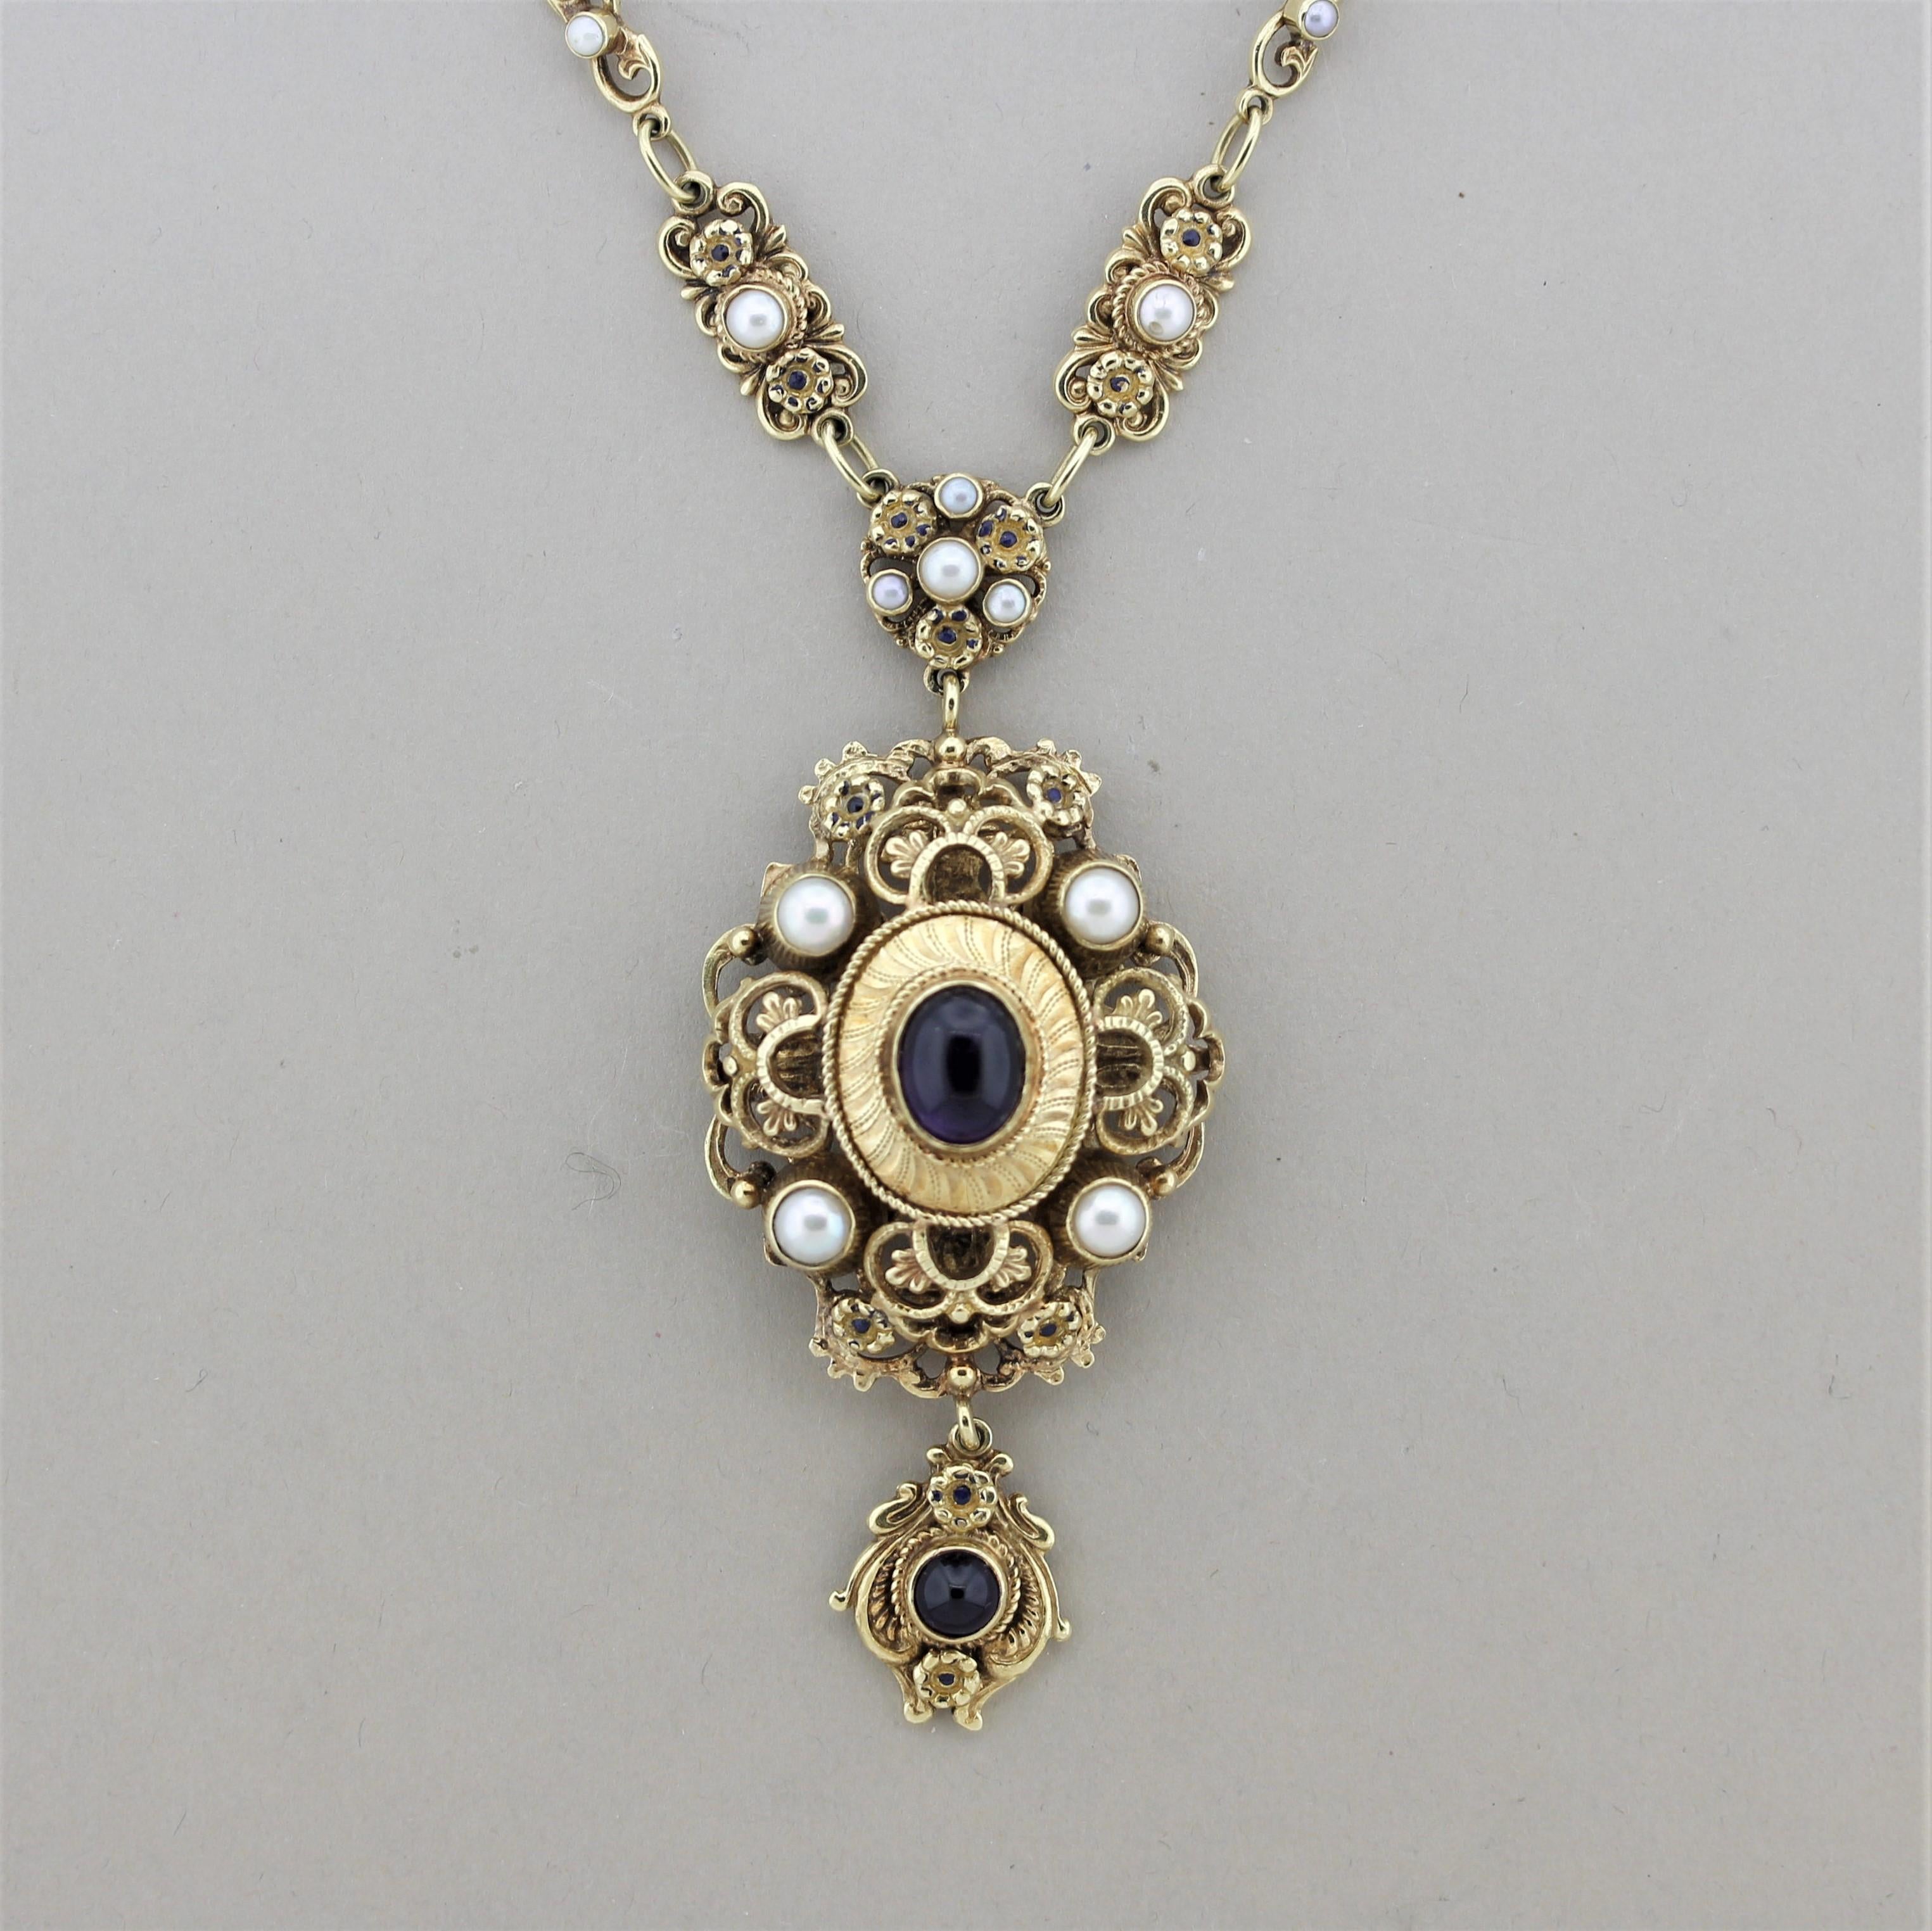 A large vintage gold necklace made in the antique-style with Victorian features. The necklace showcases two amethyst cabochons along with multiple pearls set along the necklace. There is filigree goldwork as well as millgrain which are classic